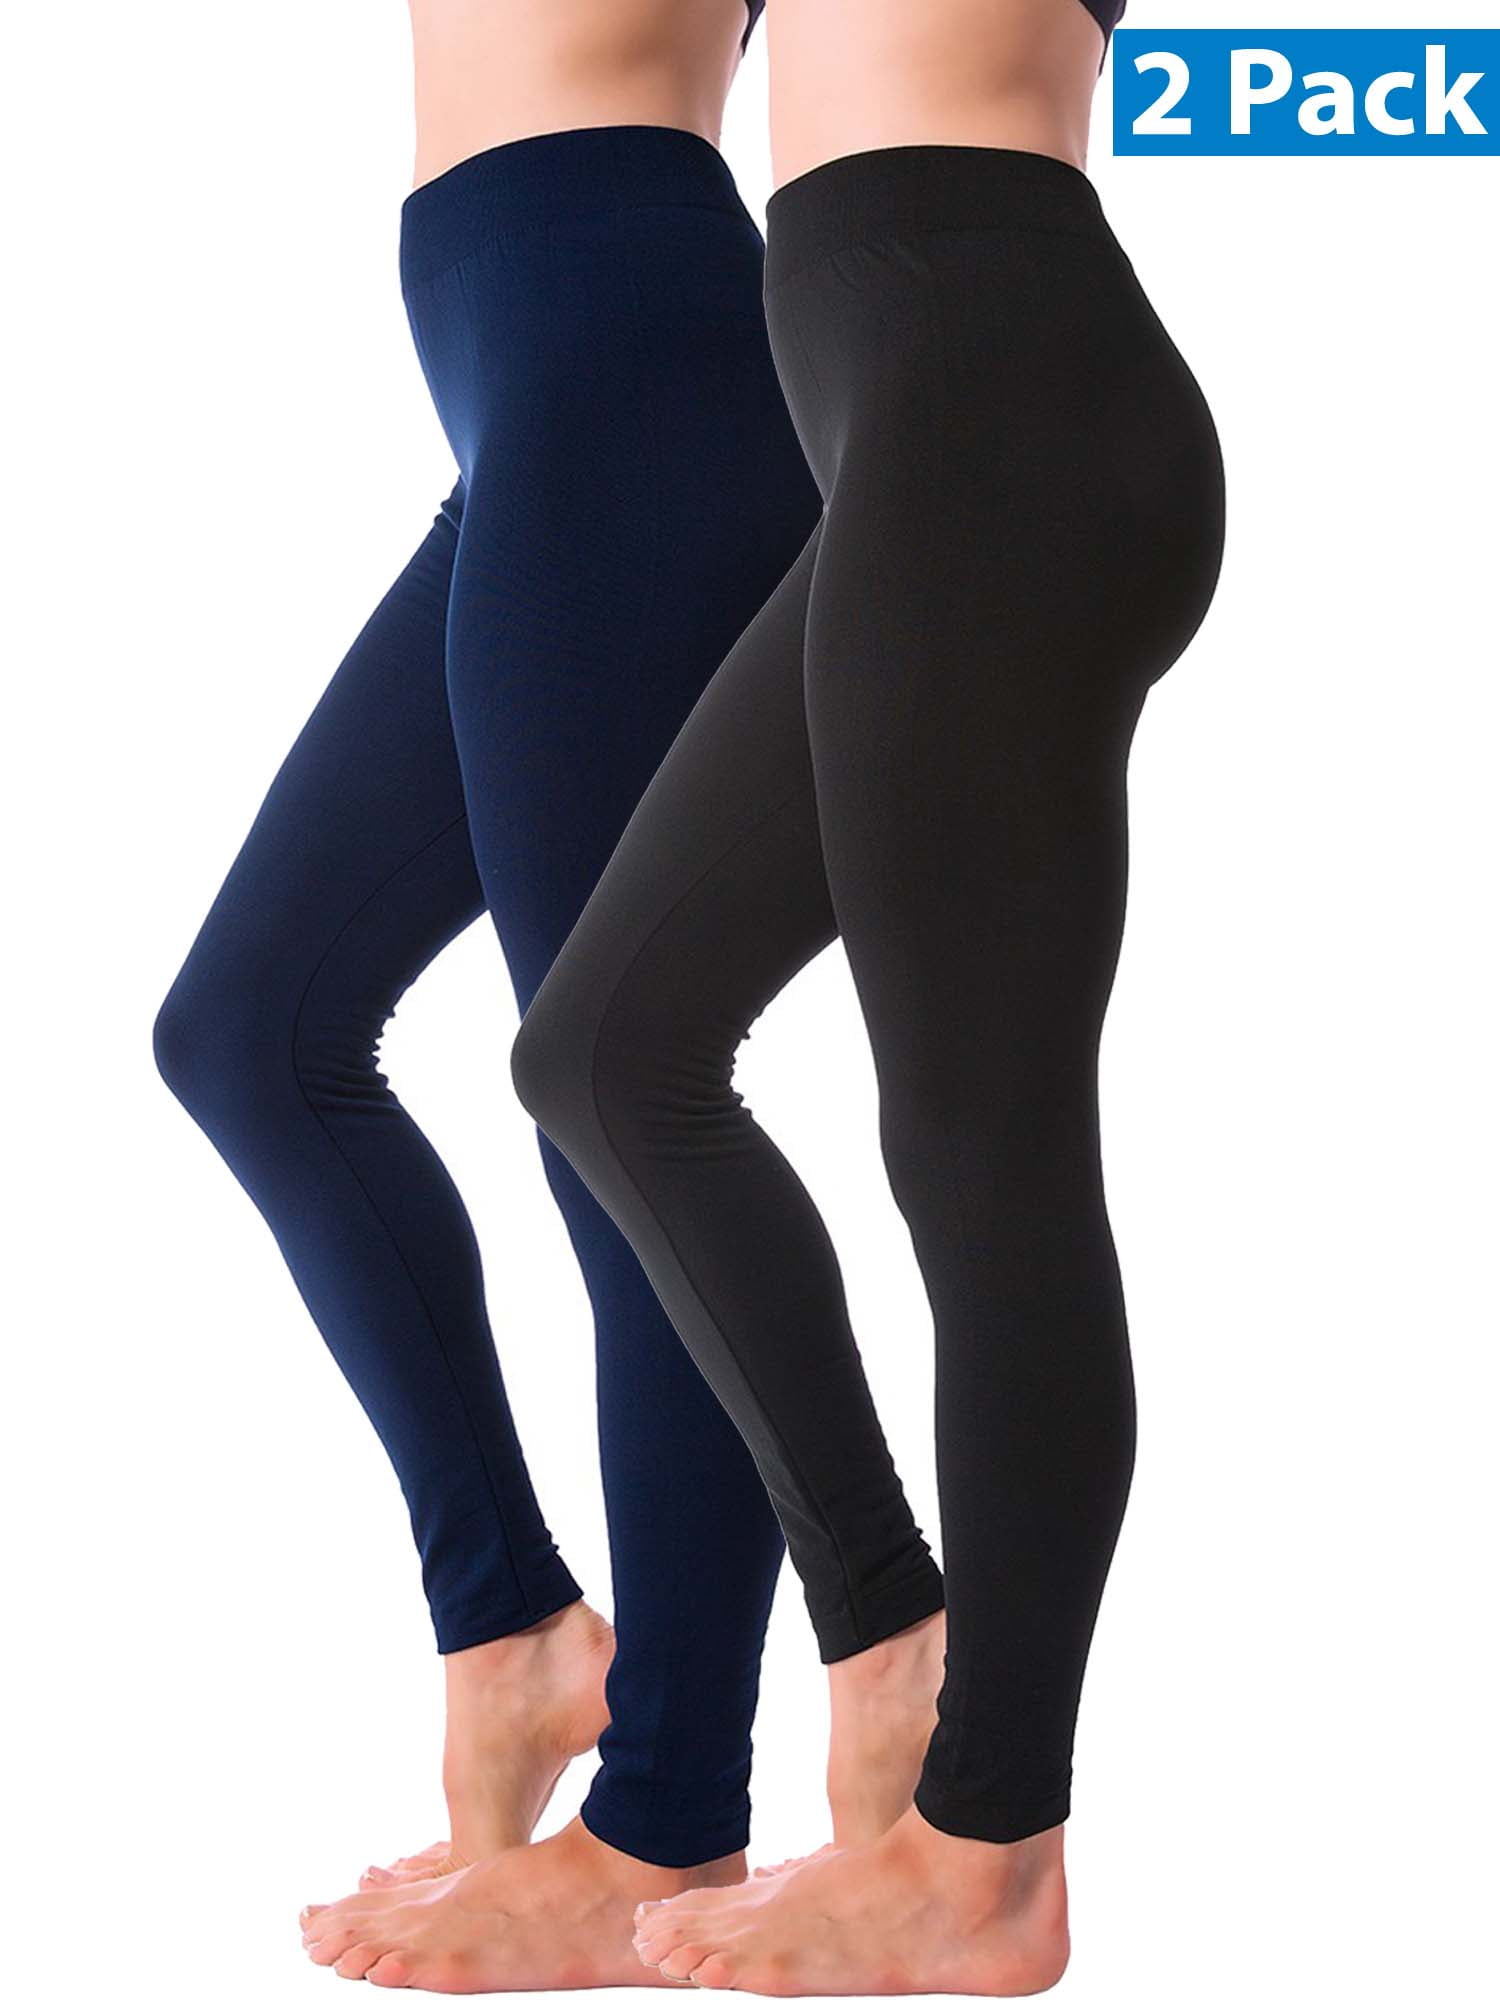 WOMENS LADIES WINTER FLEECE THERMAL WARM THICK FULL LENGTH LEGGINGS ALL COLOURS 